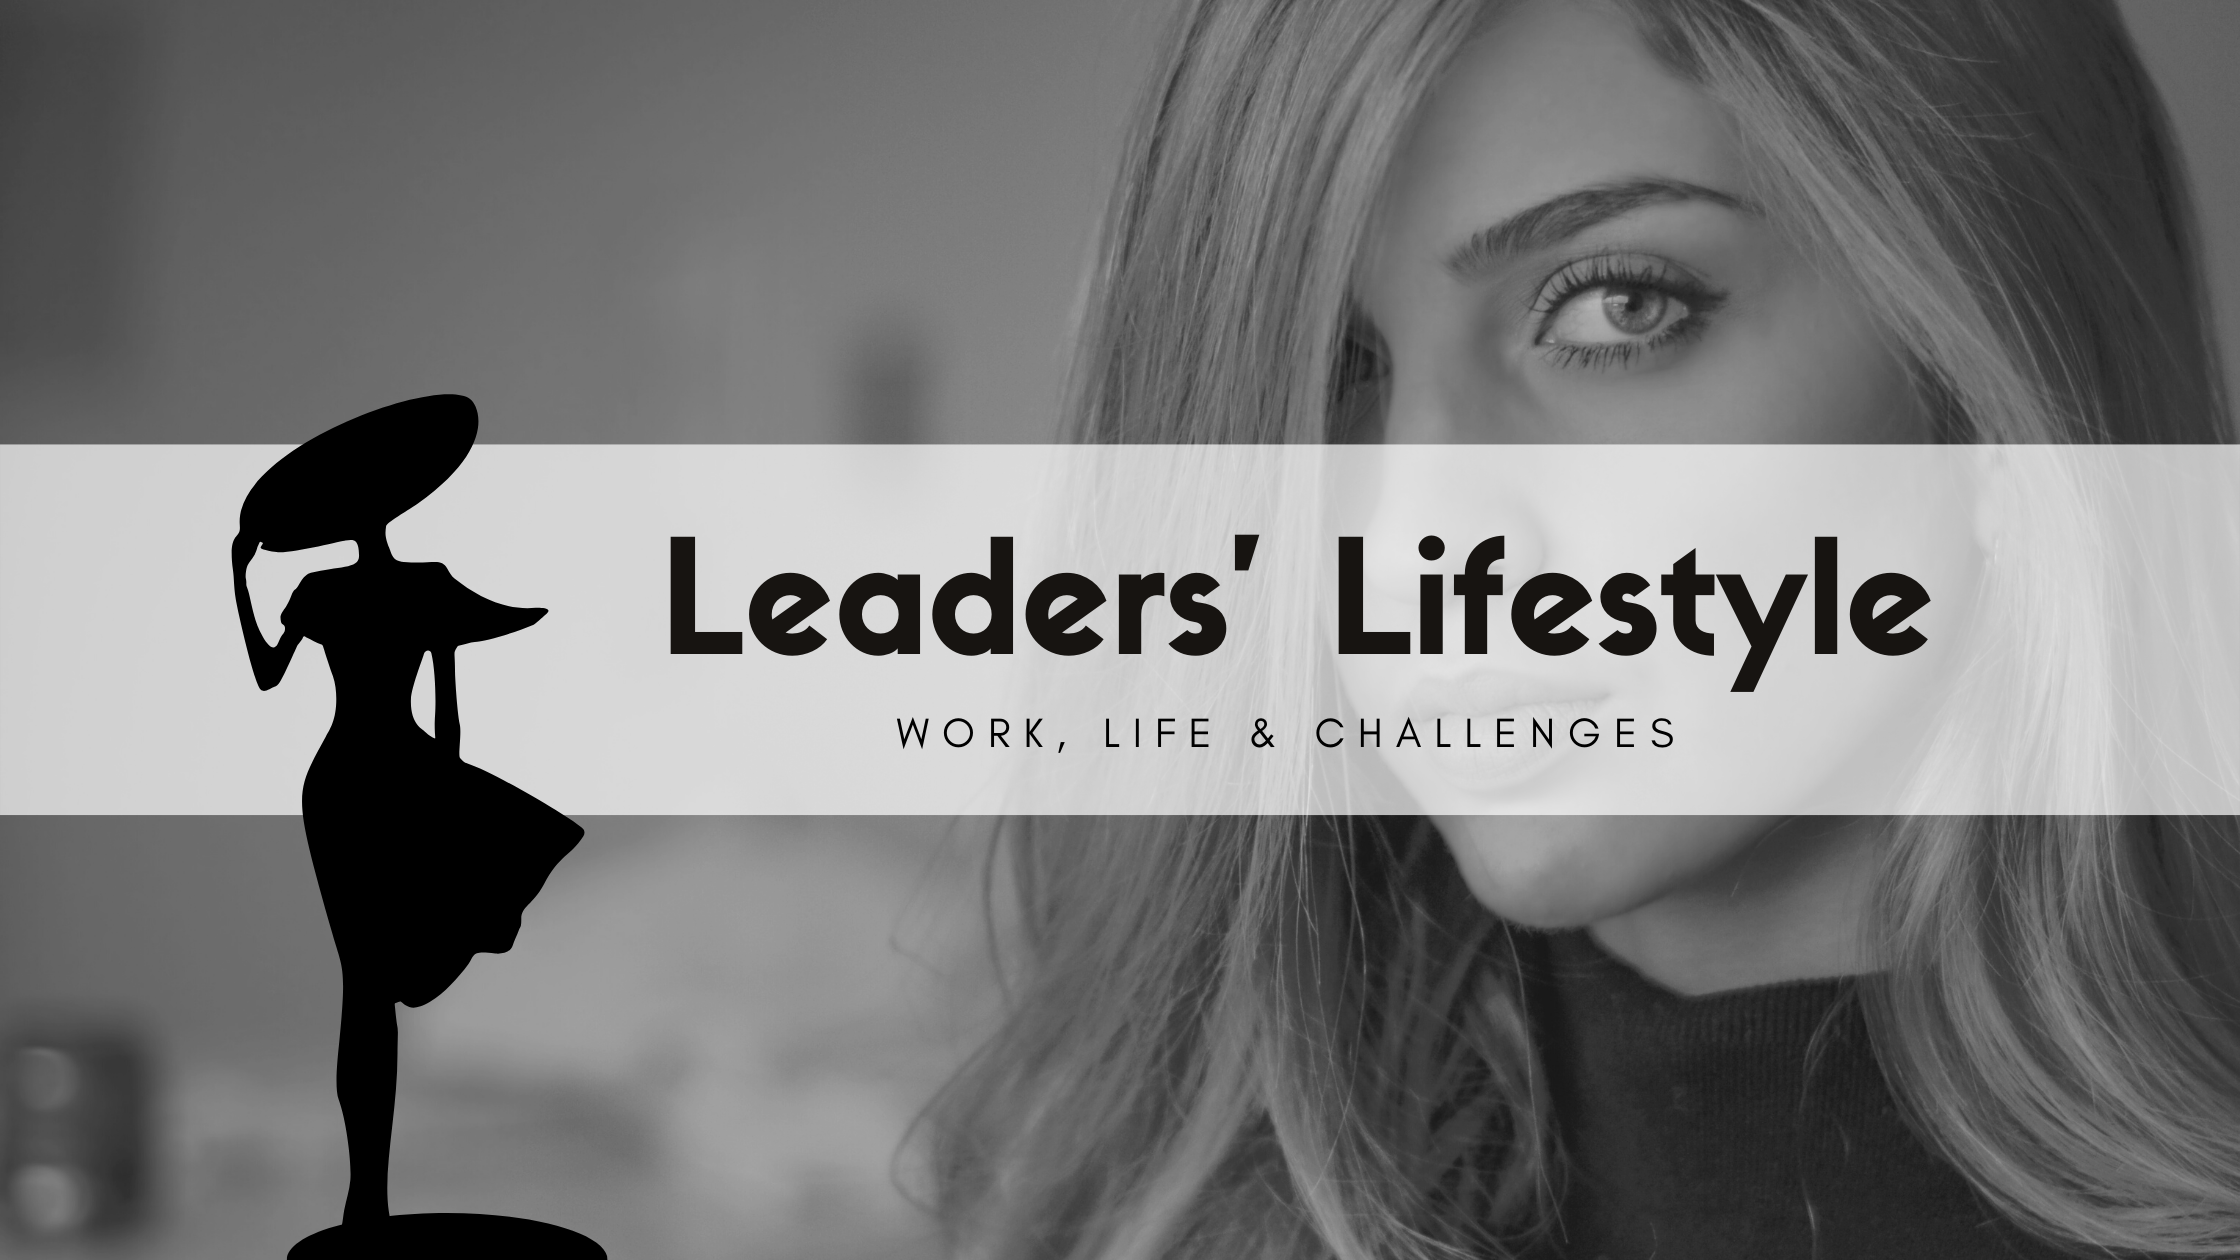 WHY YOU SHOULD KNOW LEADERS’ LIFESTYLE